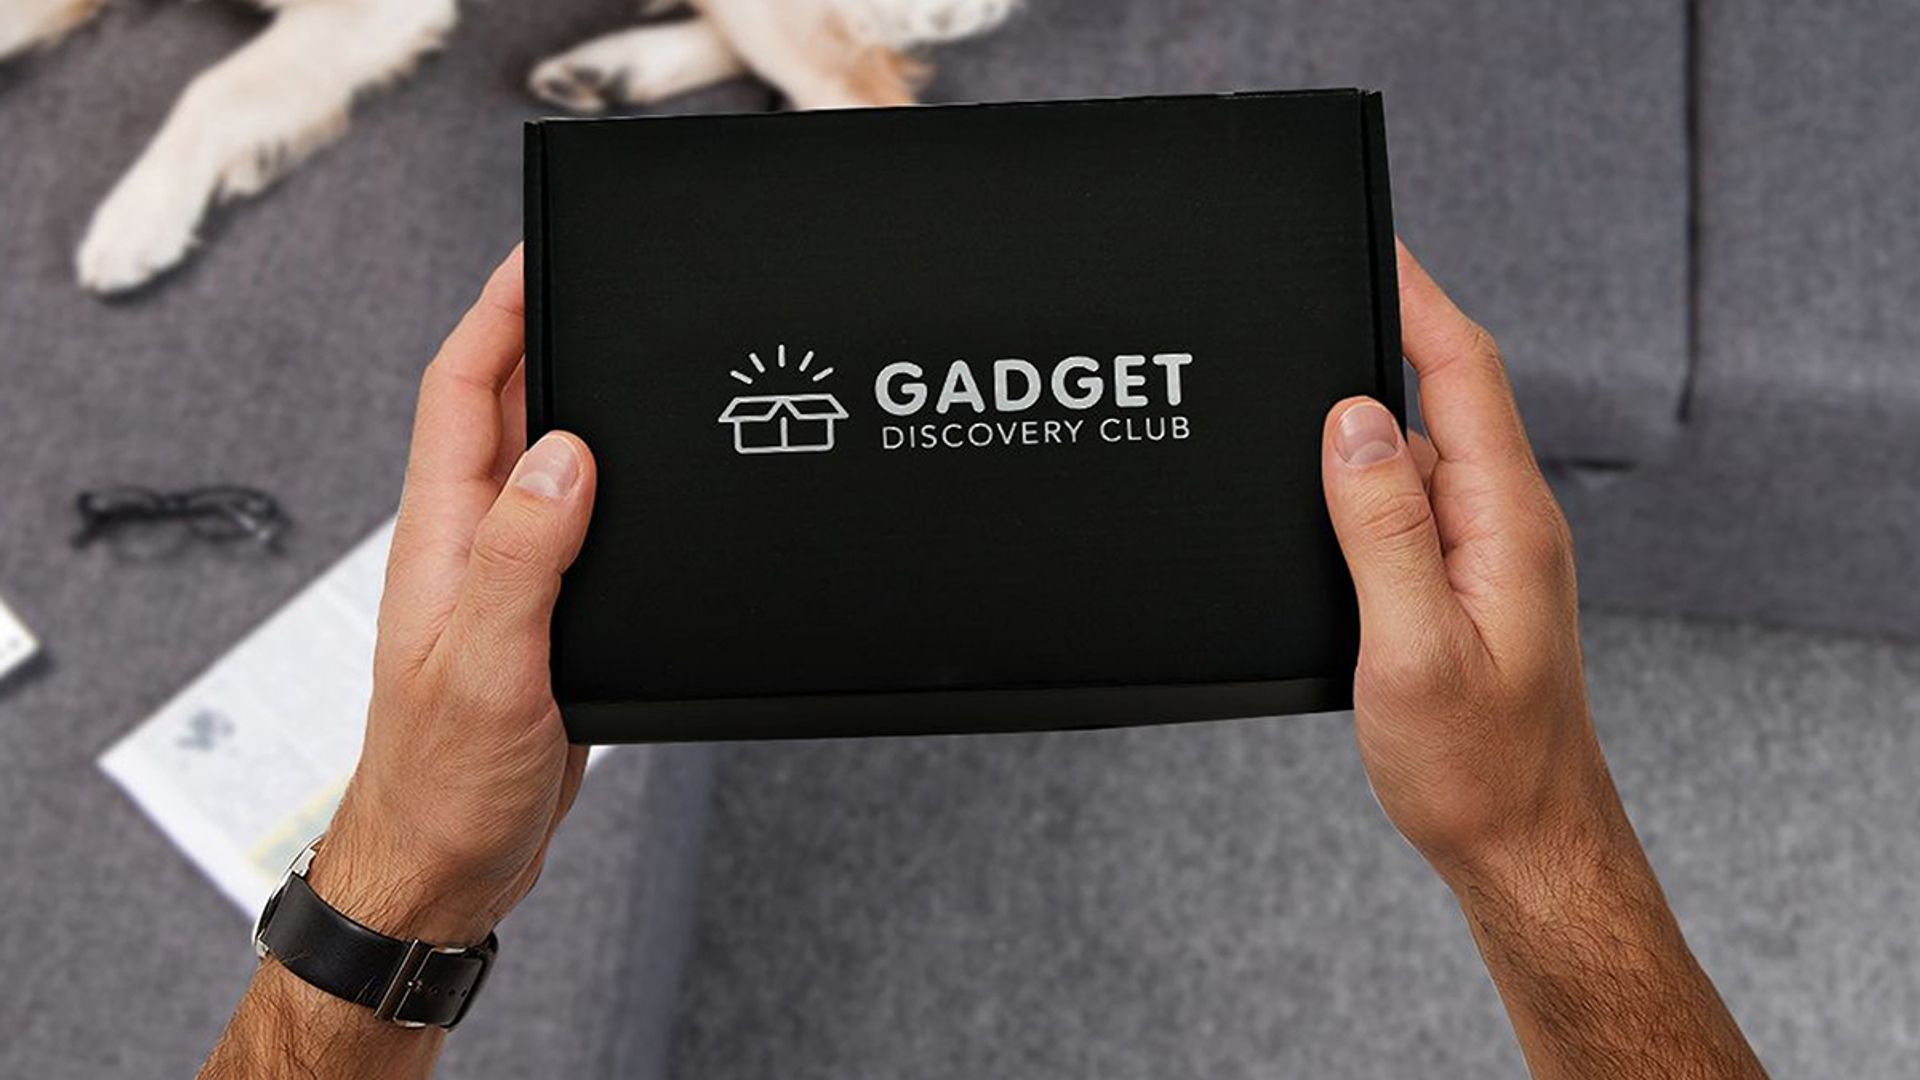 Stuck for Father’s Day? This gadget subscription box will send dad a mystery box EVERY month